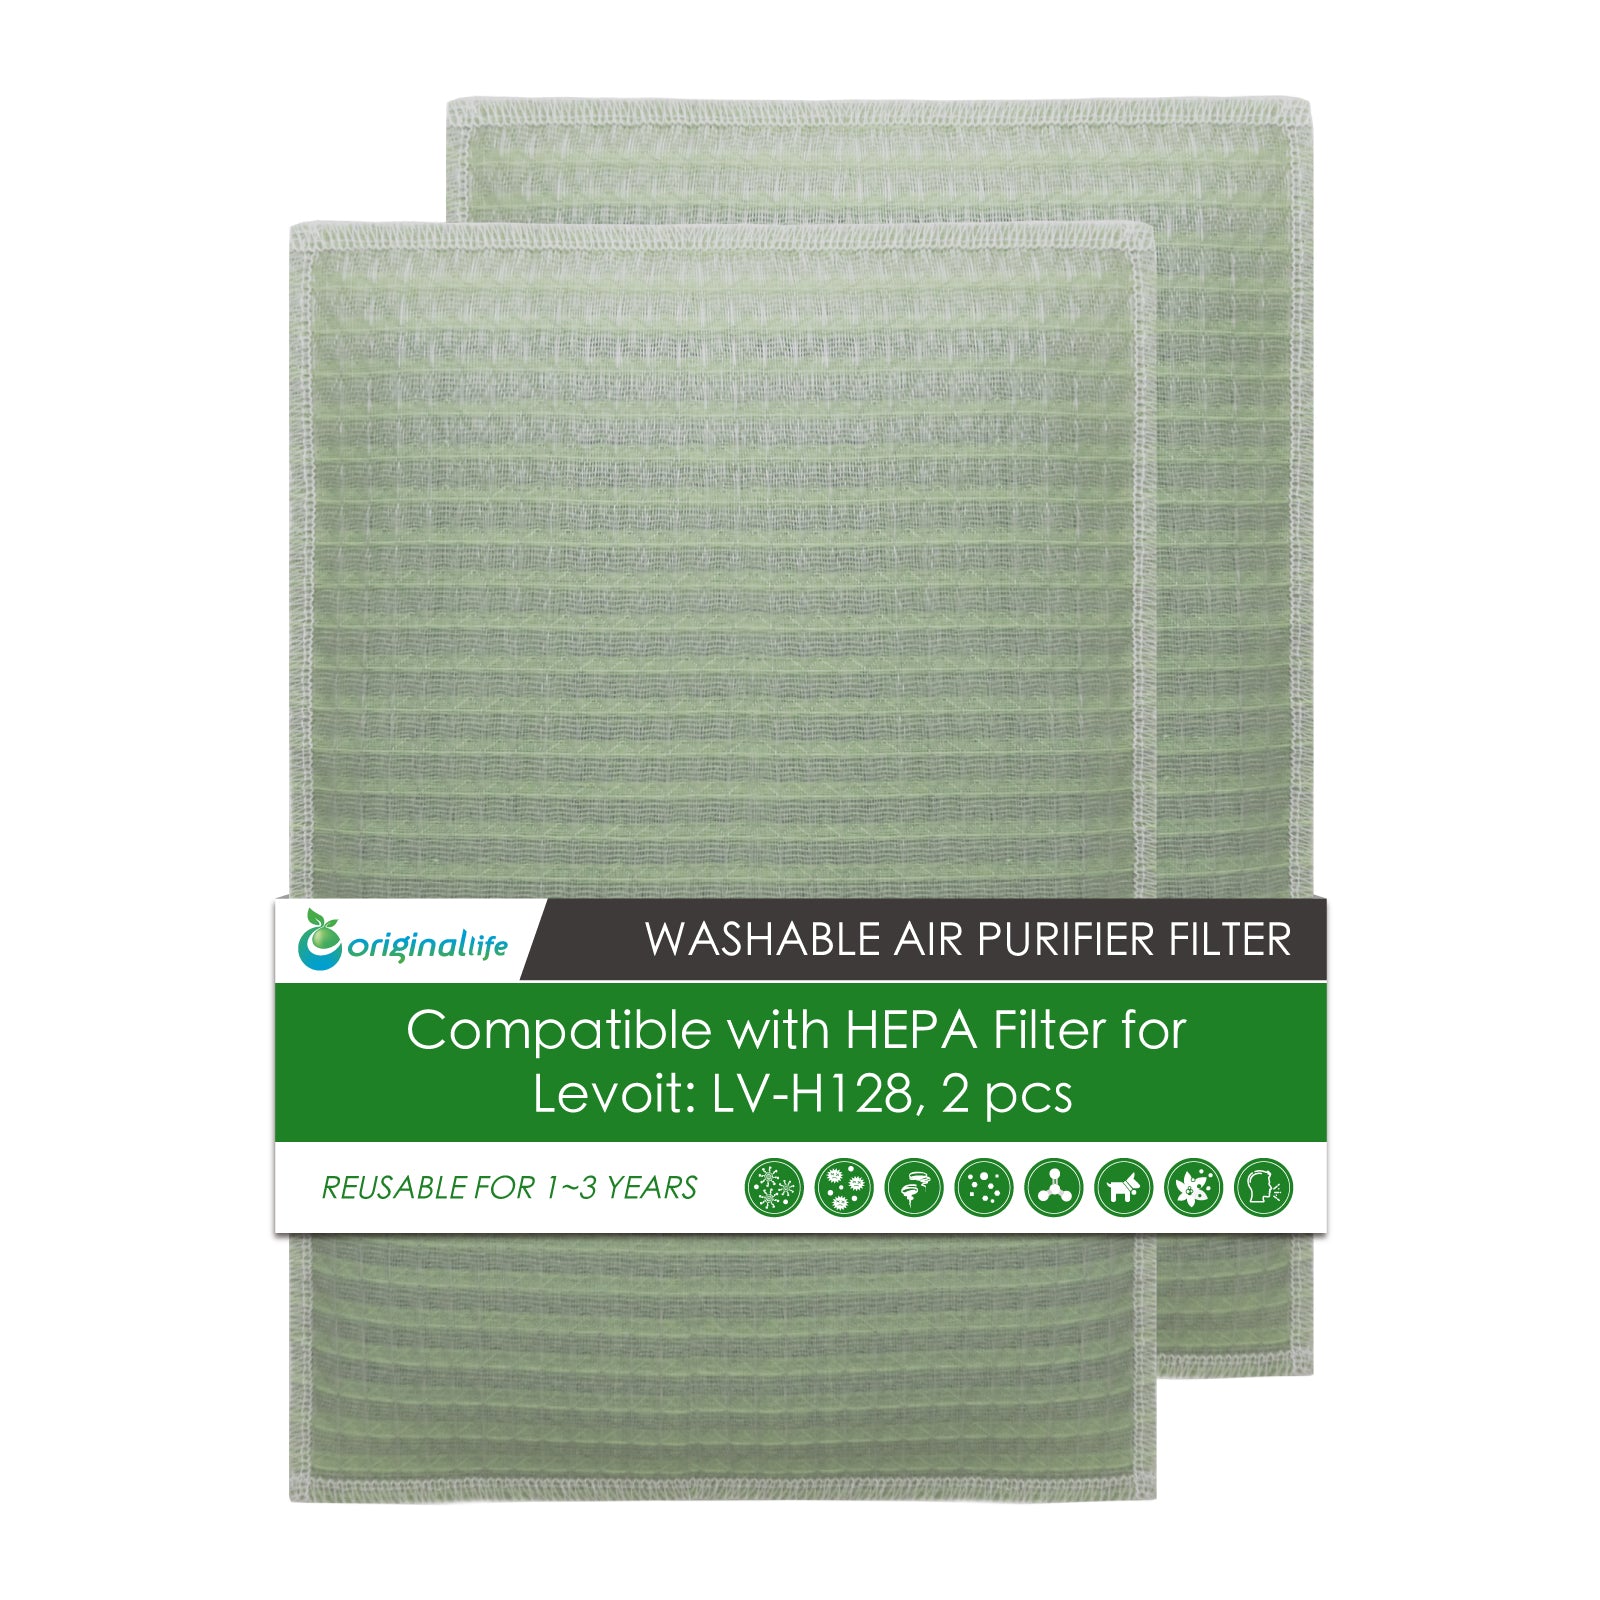 RNAB09QMLY64R anycore for levoit lv-h128 replacement filter